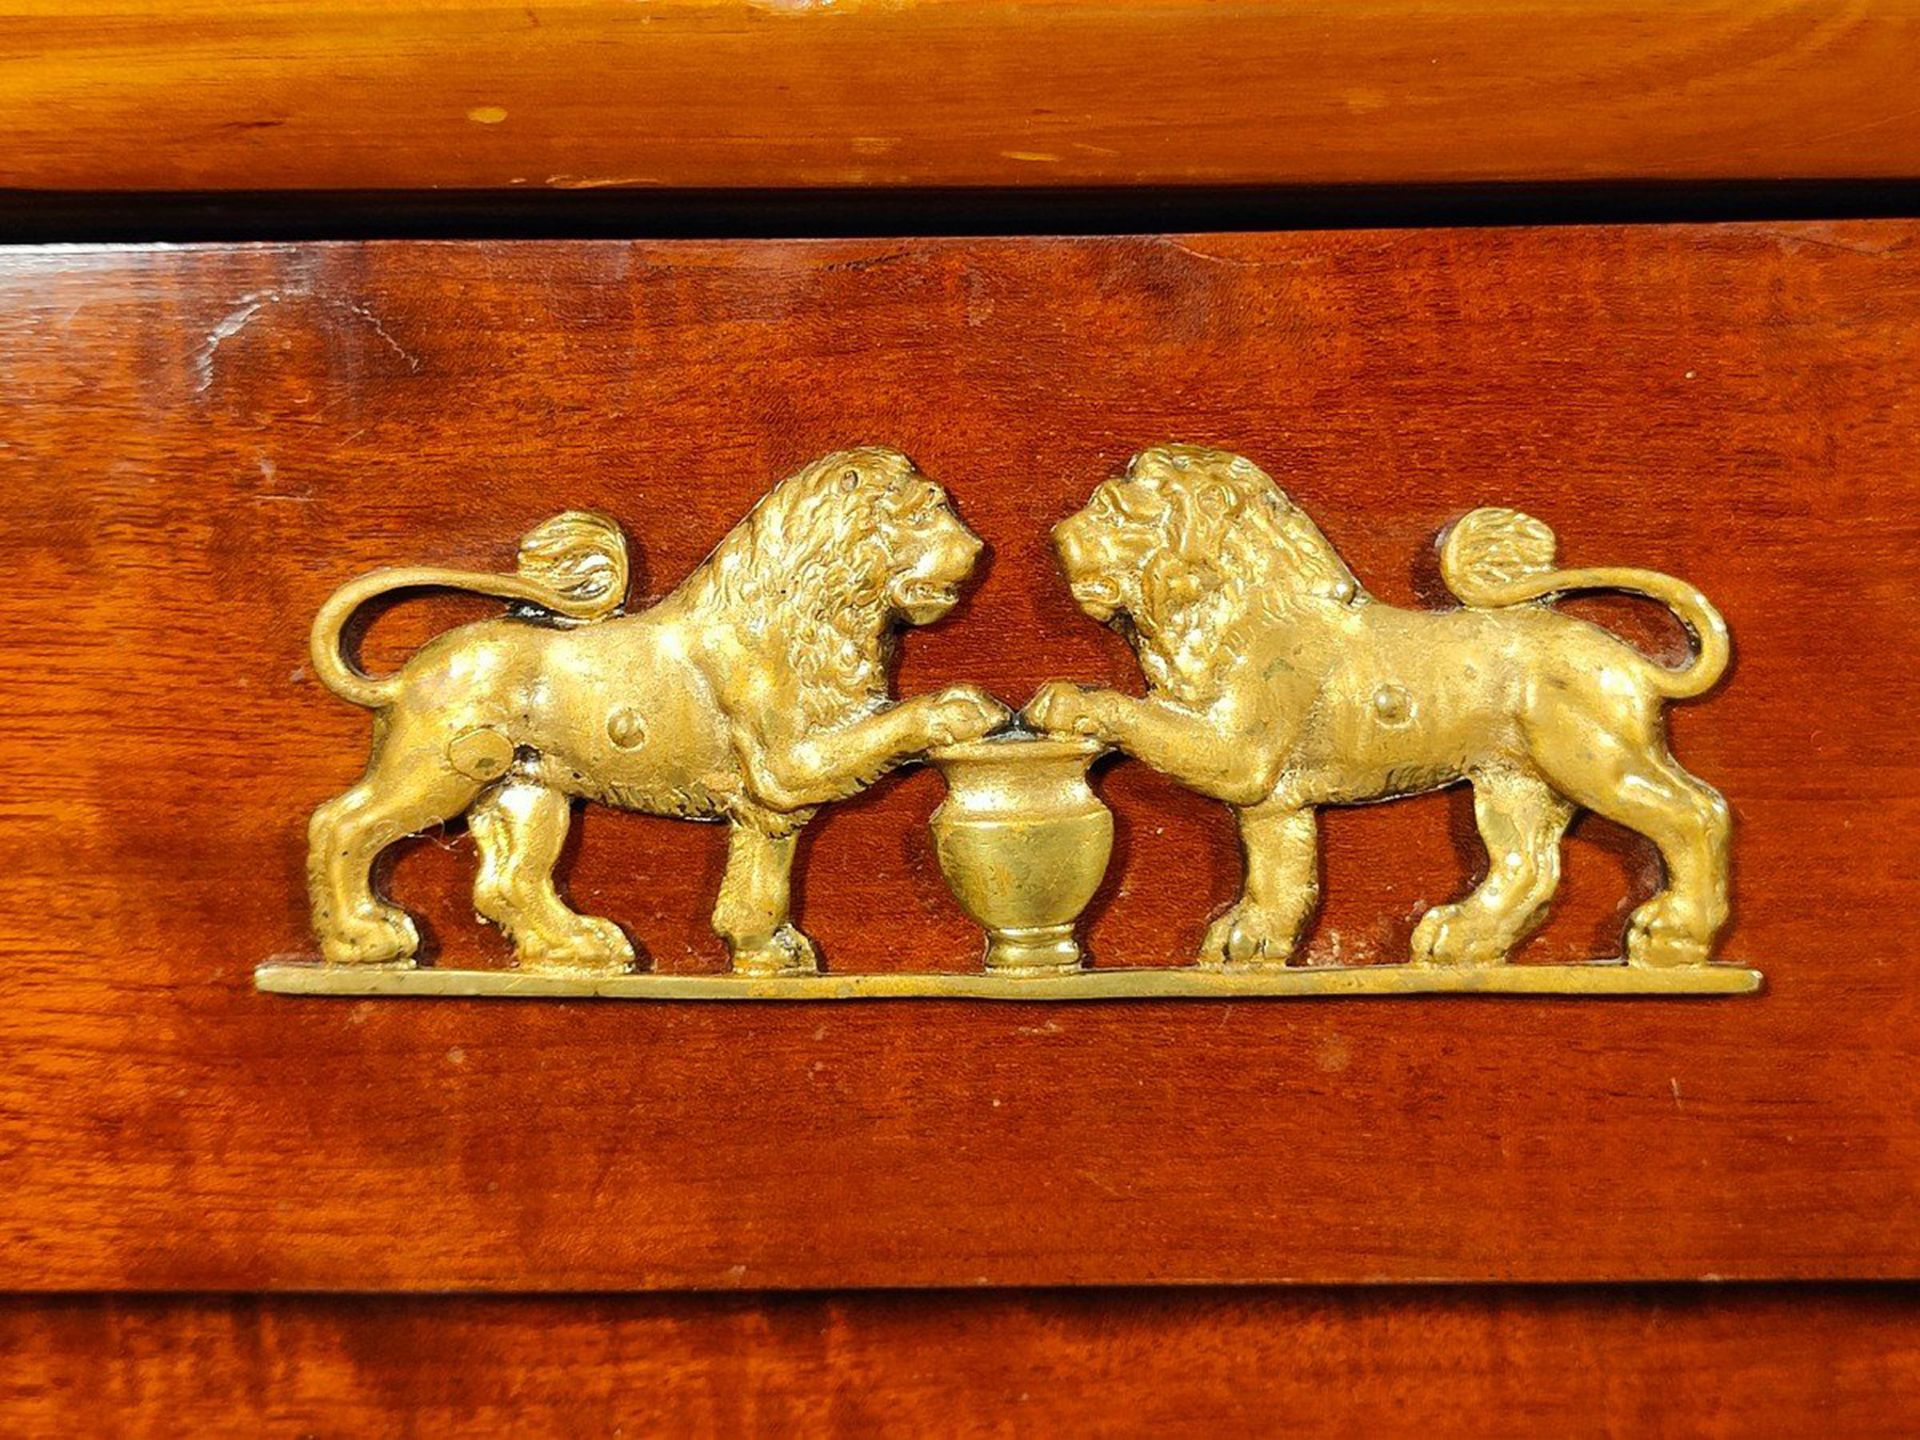 19th century empire chest of drawers, French work - Image 2 of 5